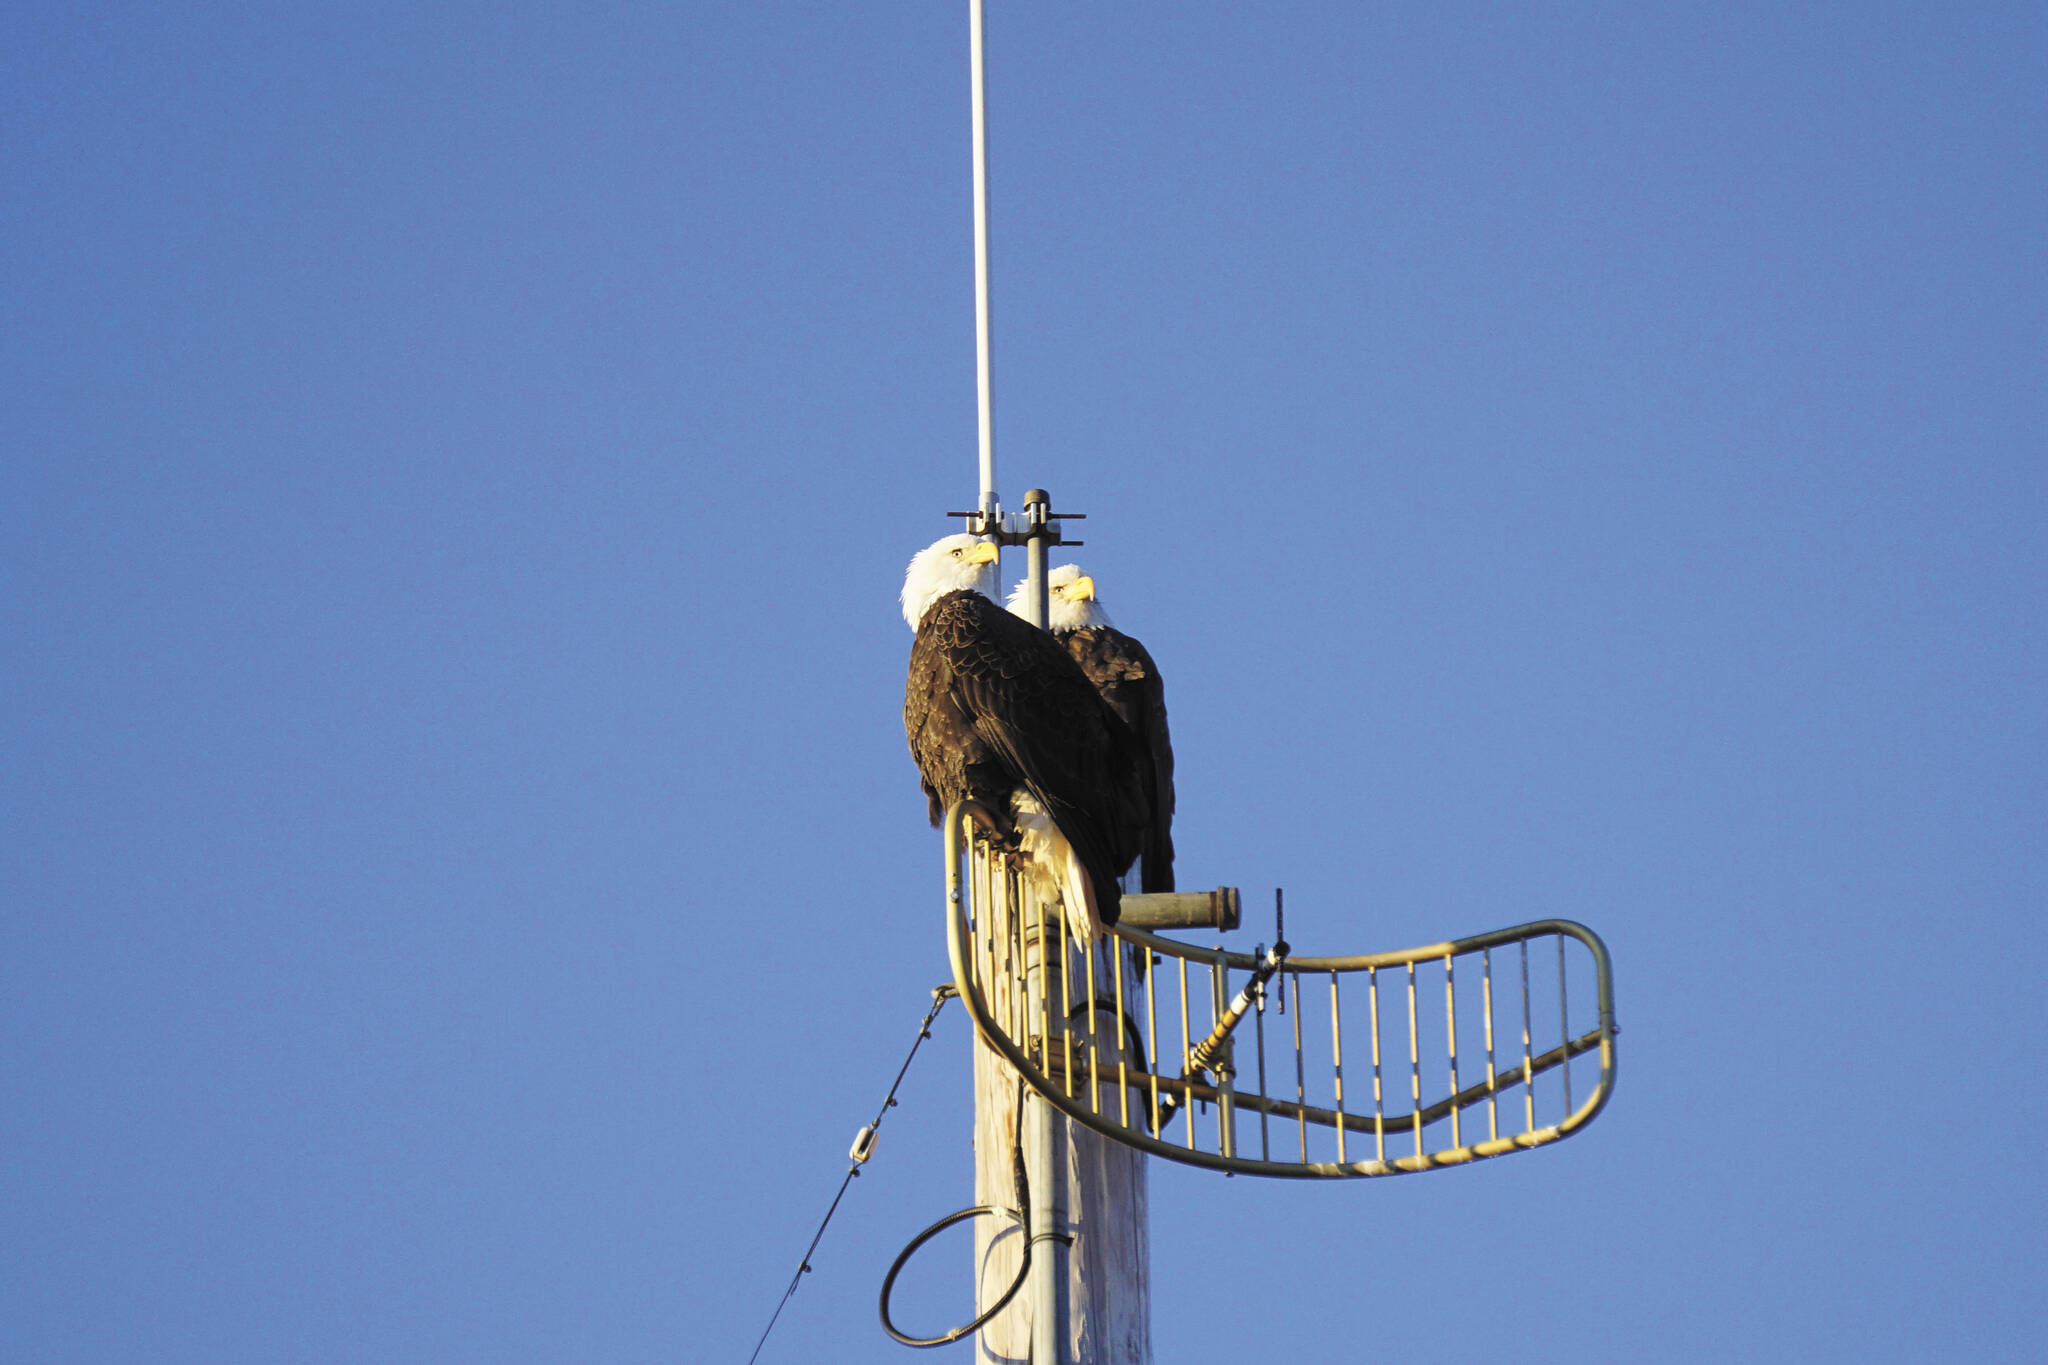 A pair of bald eagles on Friday, Dec. 9, 2022, perch on an antenna at the KBBI Public Radio station in Homer, Alaska. (Photo by Michael Armstrong/Homer News)